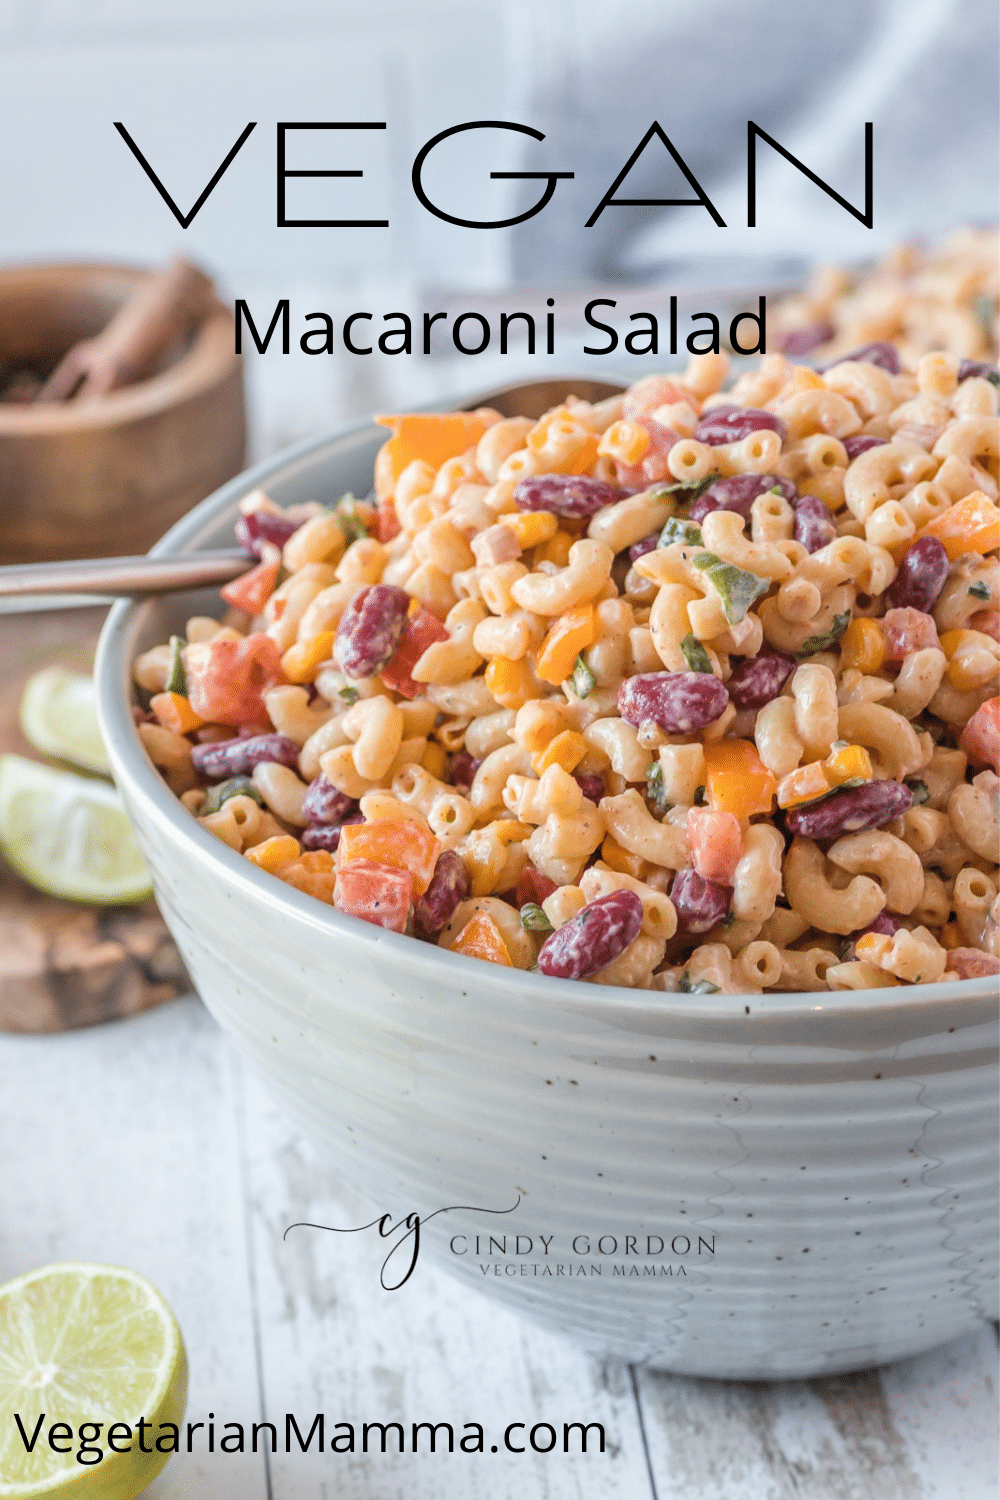 Vegan Macaroni Salad is a crowd pleaser! This vegan macaroni salad is packed with colorful and flavorful veggies. You will love the crunch and the creaminess this macaroni salad brings to the table! Naturally gluten free, dairy free and nut free, just use vegan sour cream to make this dish vegan! | cookout food | Vegan Recipes | Vegan BBQ |